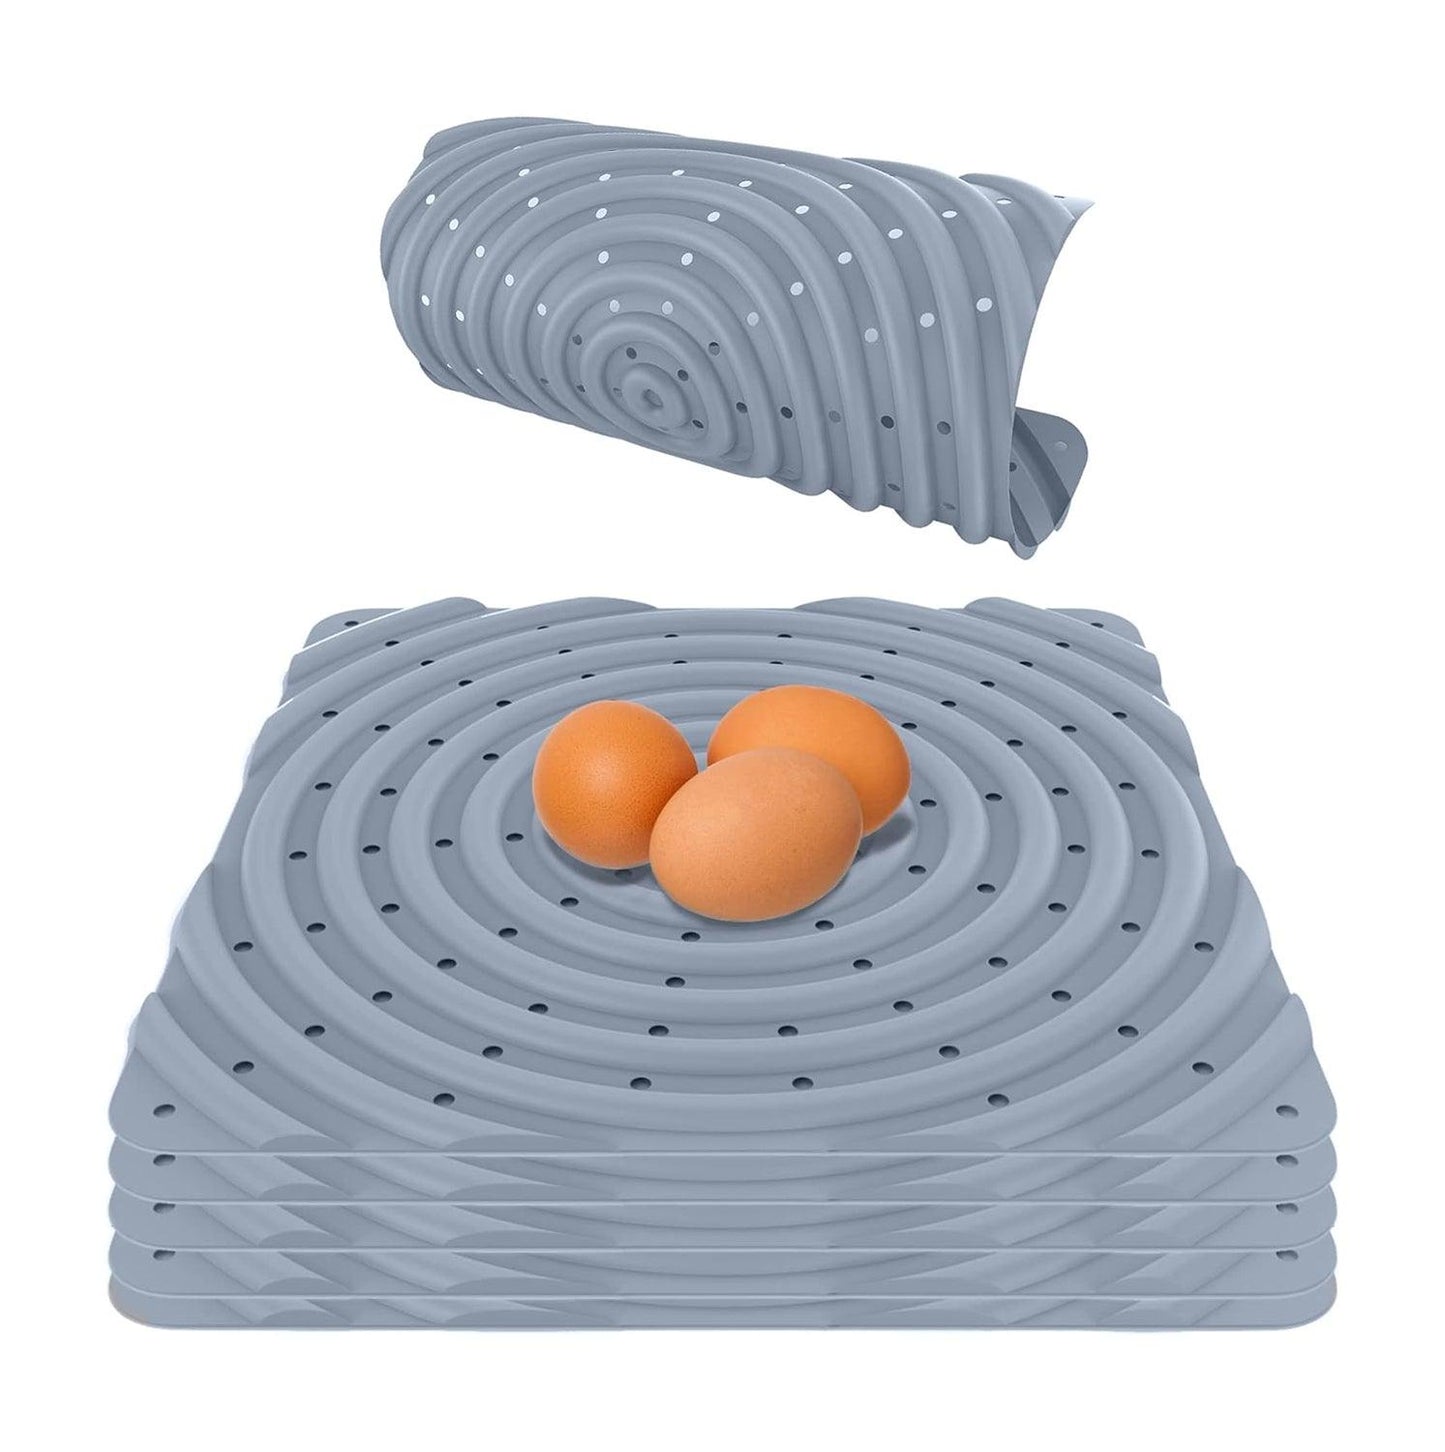 Washable Chicken Nesting Pads for Laying Eggs - Pack of 6 (Gray) - Lil'Clucker